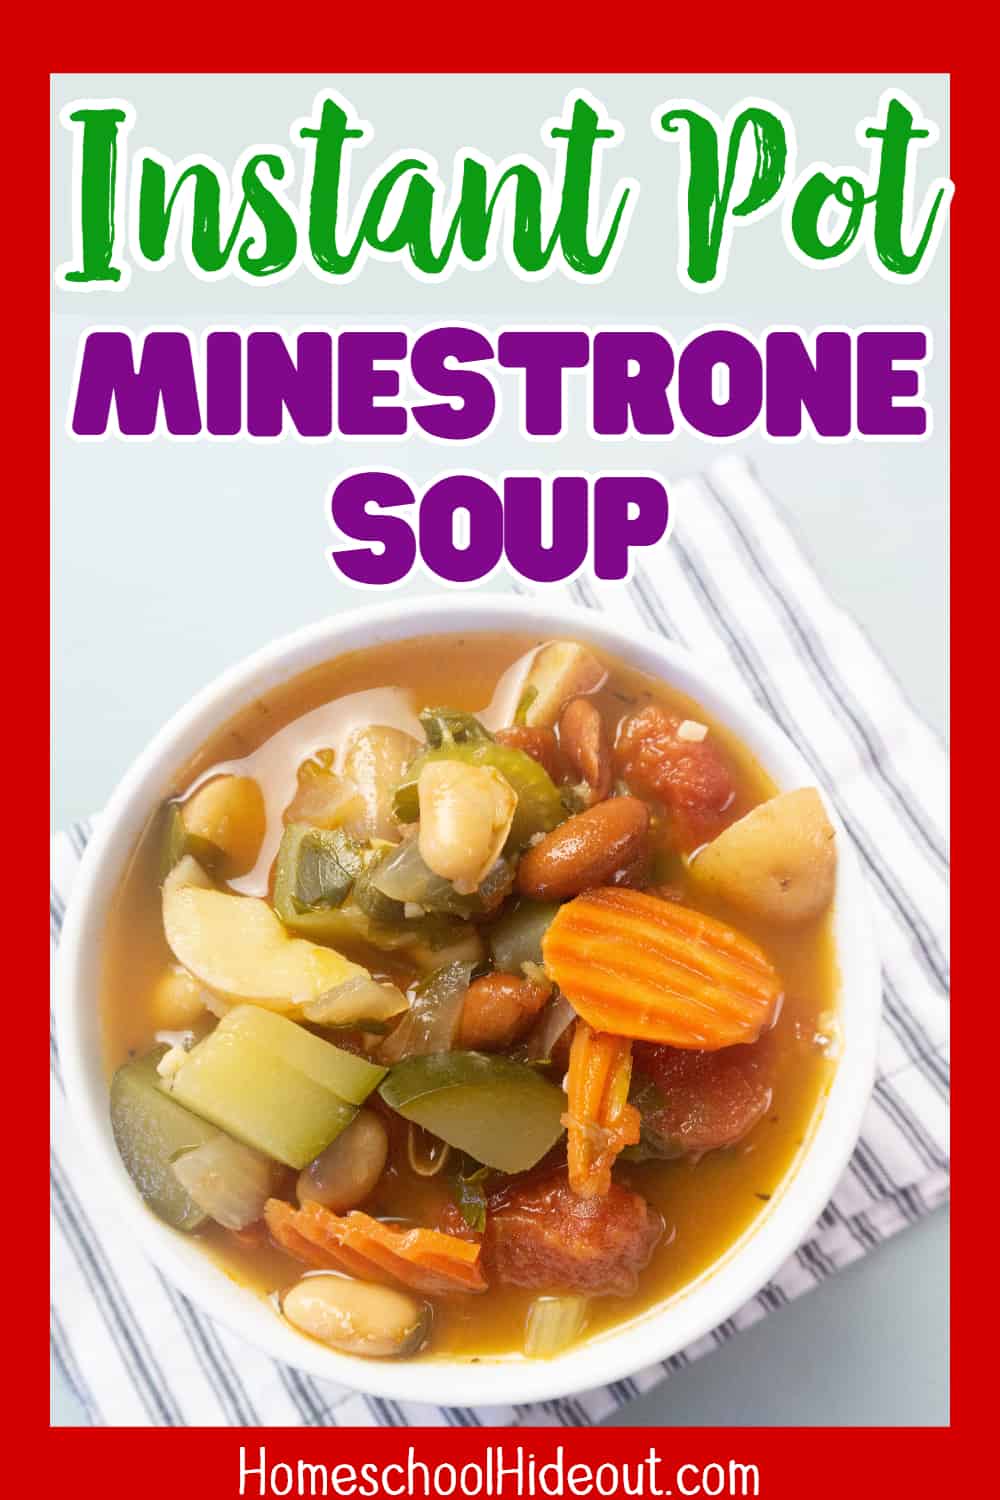 This Instant Pot minestrone soup recipe is the best I've found and it's so easy! I shared it with all of my homeschool mom friends and several loved it, too! Quick, easy, healthy and perfect for busy nights!